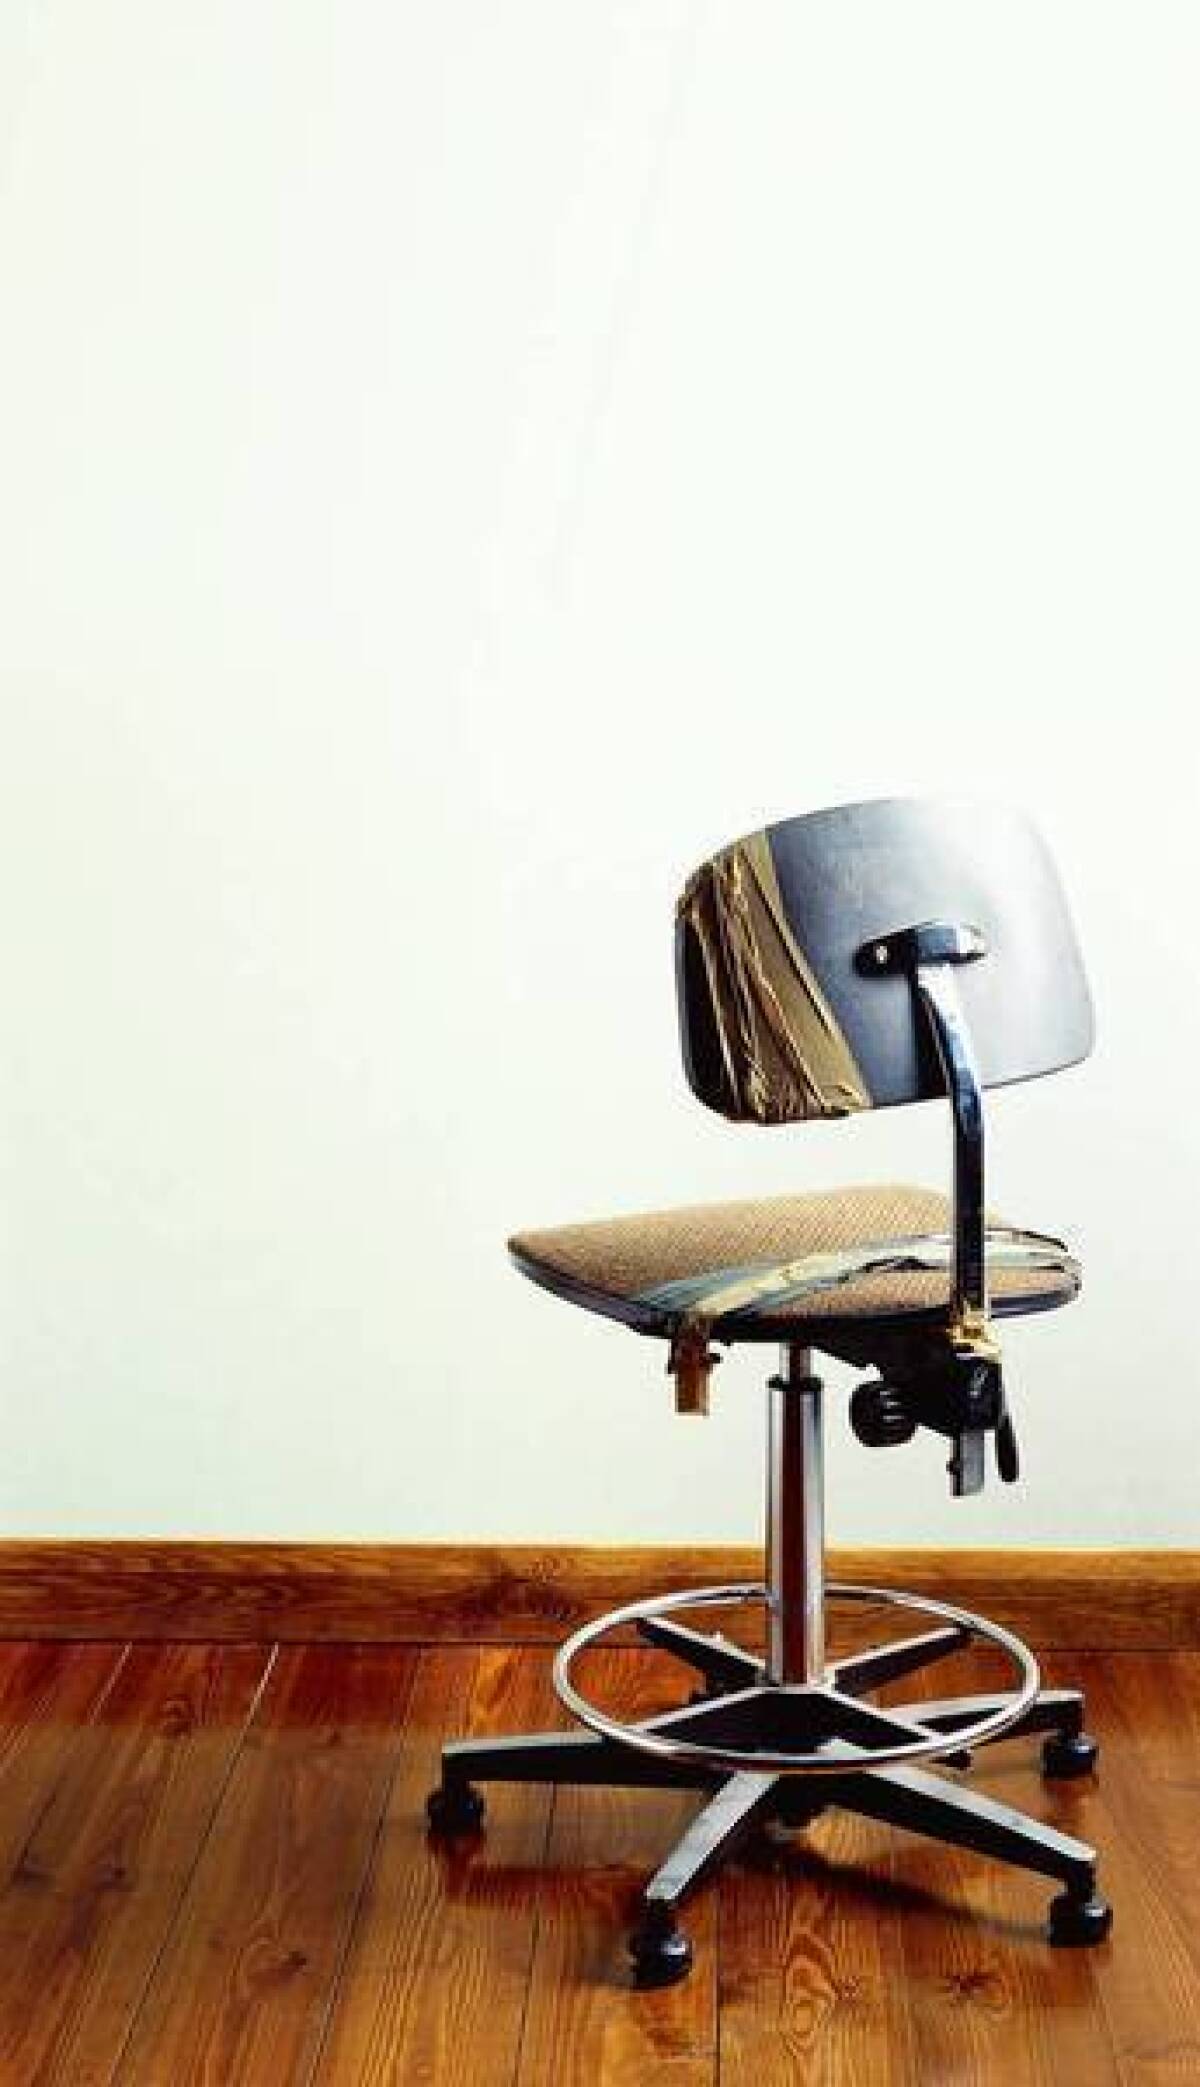 The chair can be more unhealthful than cigarettes, an Australian study suggested.